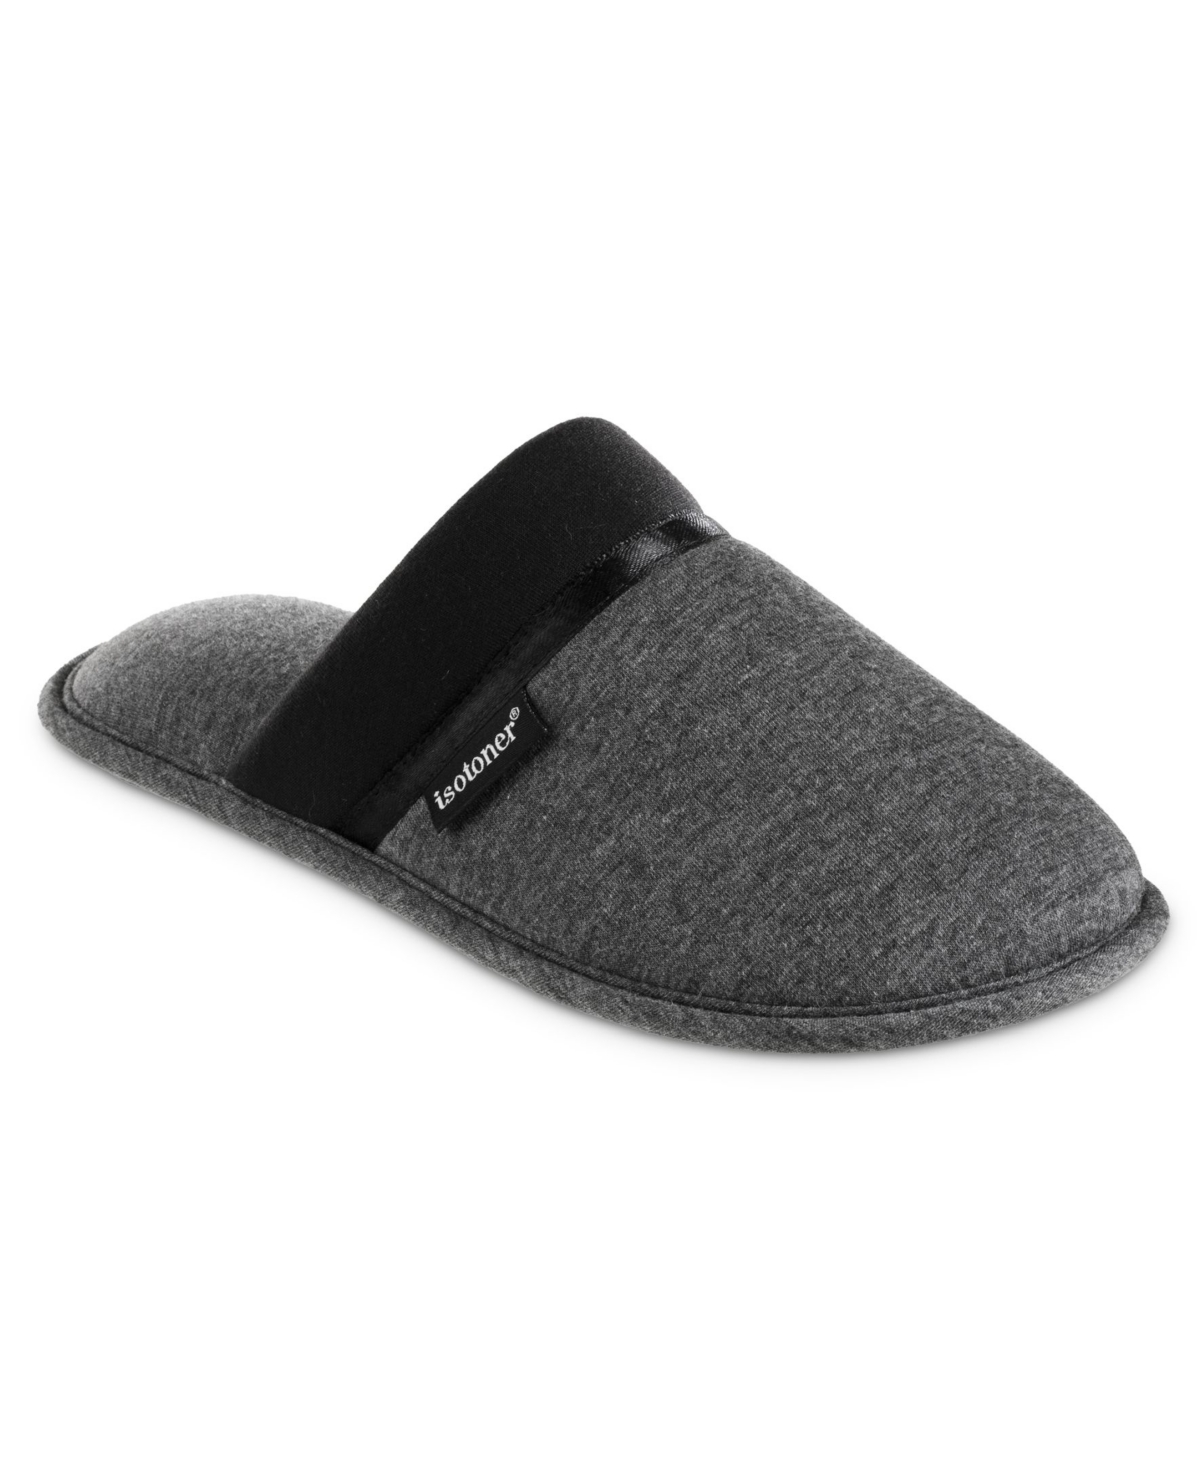 Women's Jersey Campbell Clog Slippers - Black